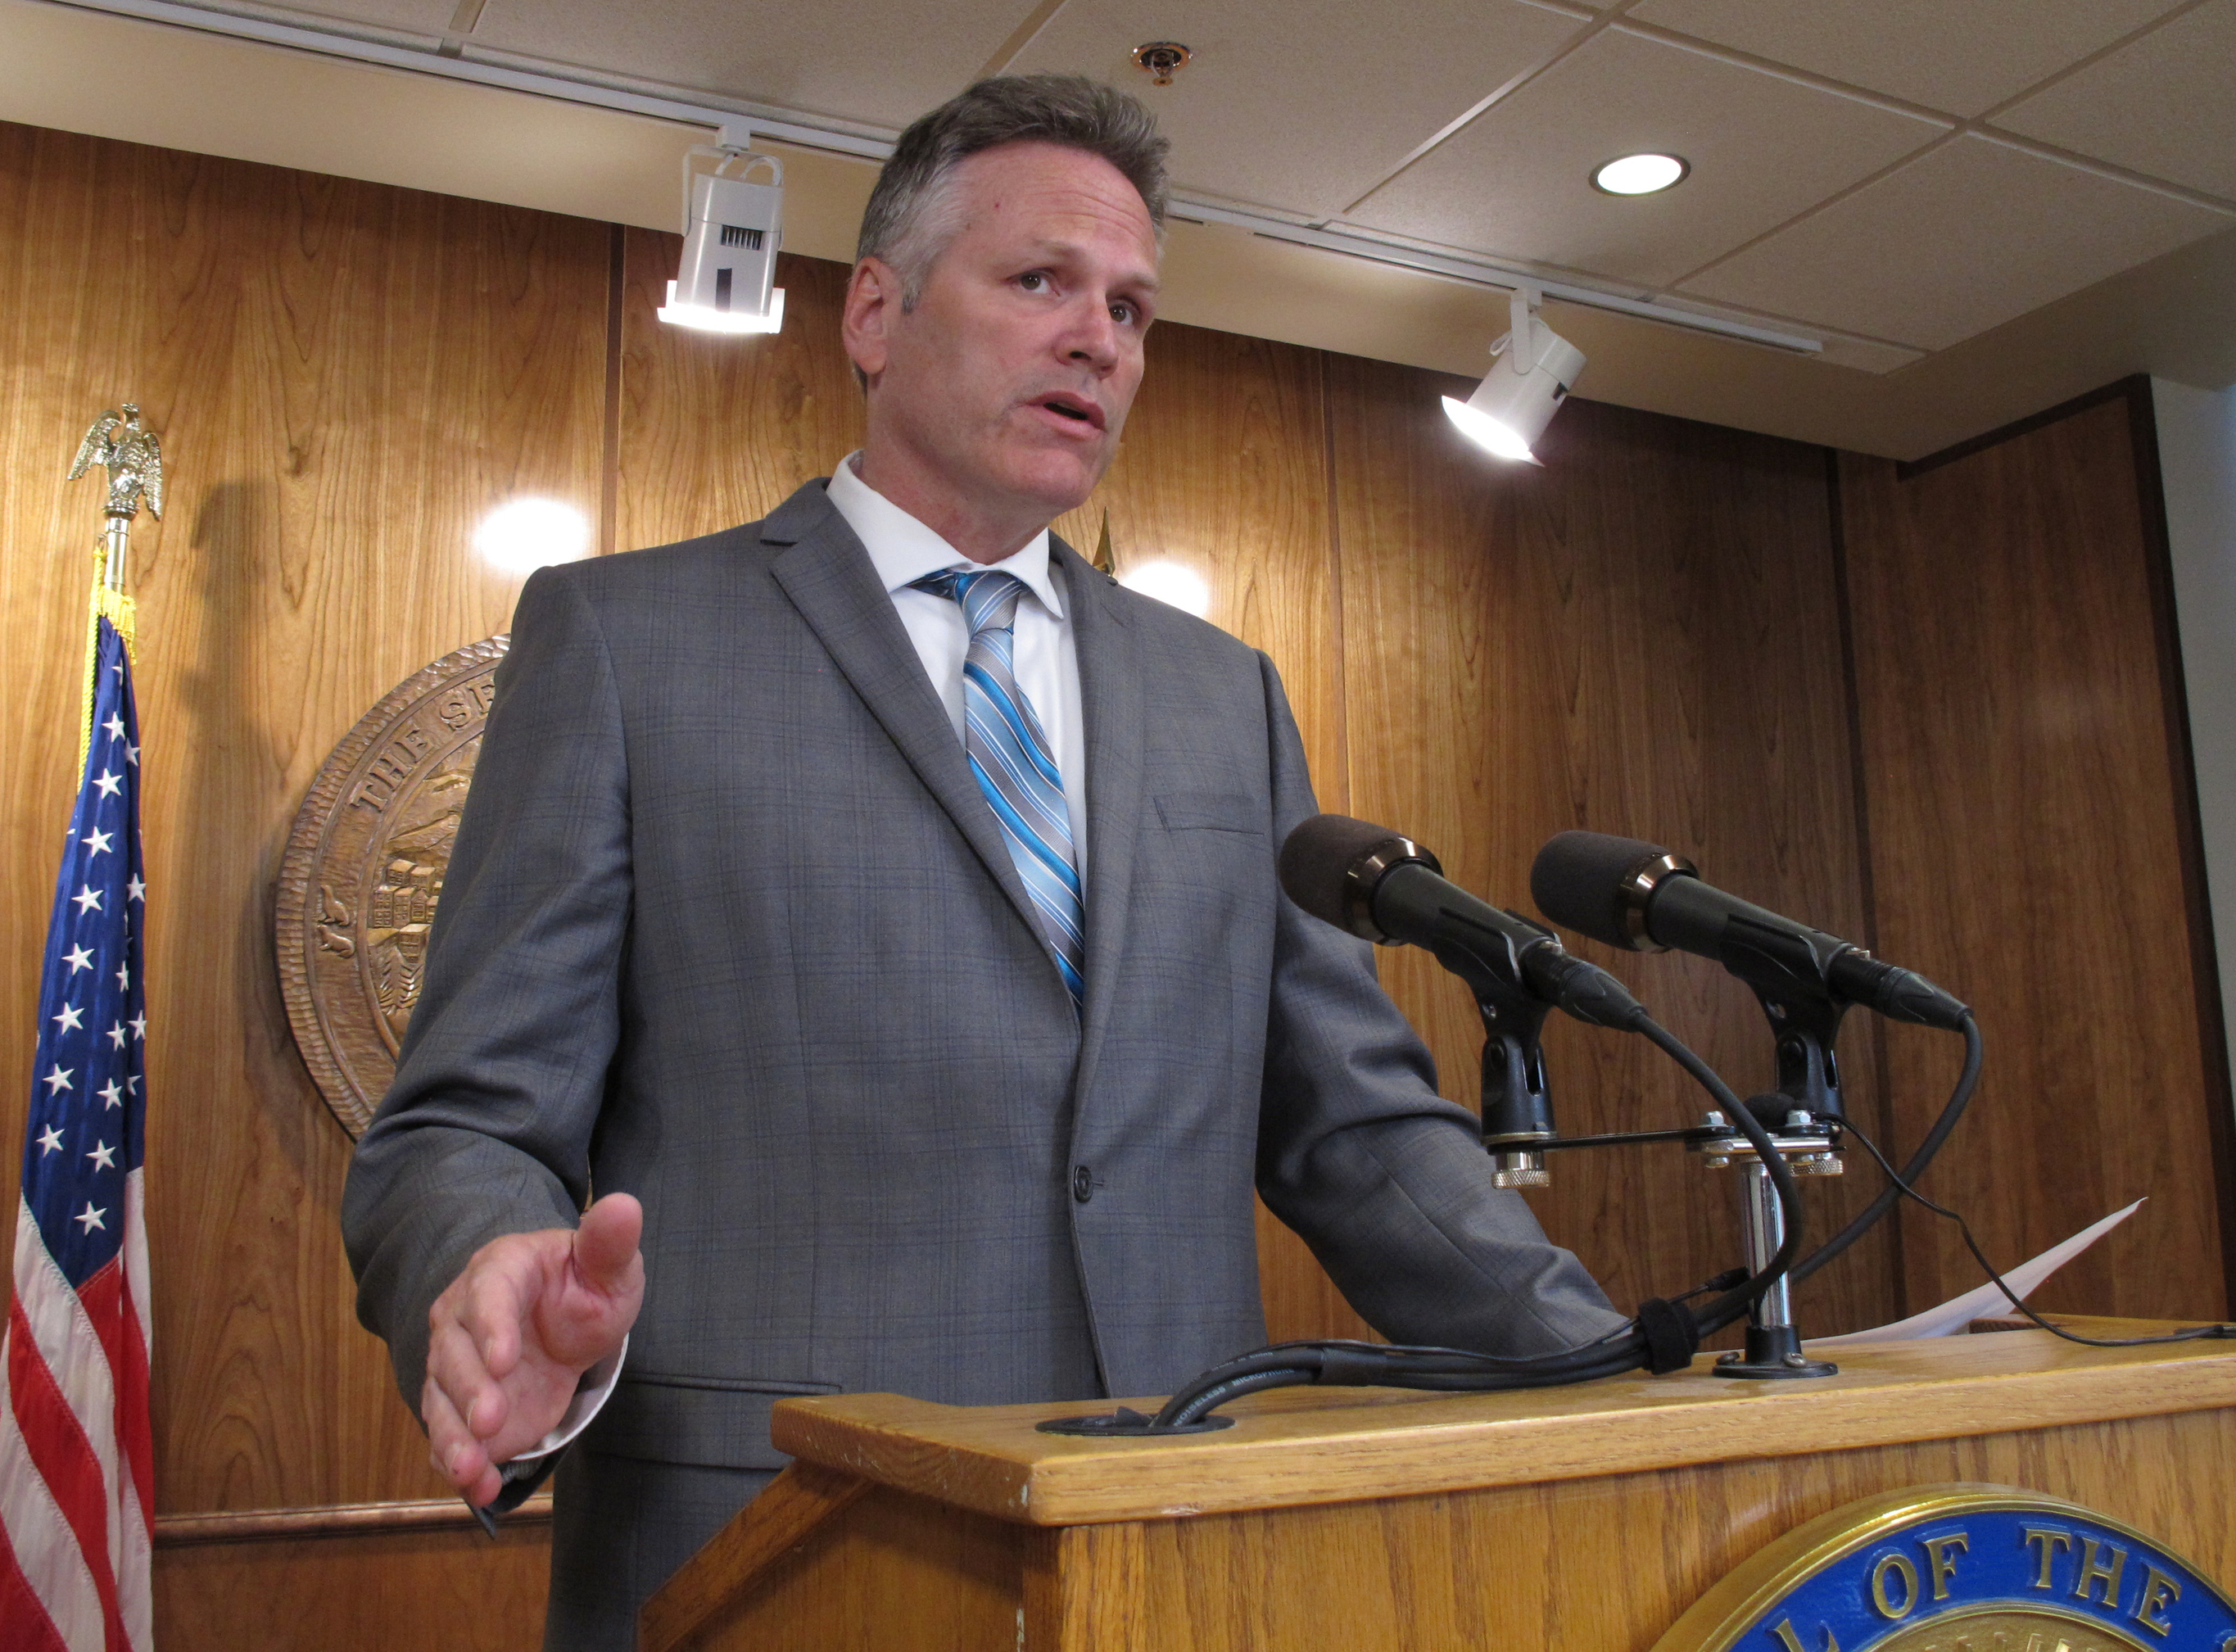 Alaska Gov. Mike Dunleavy speaks to reporters about his budget vetoes at the state Capitol in Juneau, Alaska Friday, June 28, 2019. The university system, health and social service programs and public broadcasting were among the areas affected by vetoes. The budget agreed to by the House and Senate cut state support for the university system by a fraction of what Dunleavy proposed. Lawmakers have the ability to override budget vetoes if they can muster sufficient support. (Becky Bohrer&mdash;AP)